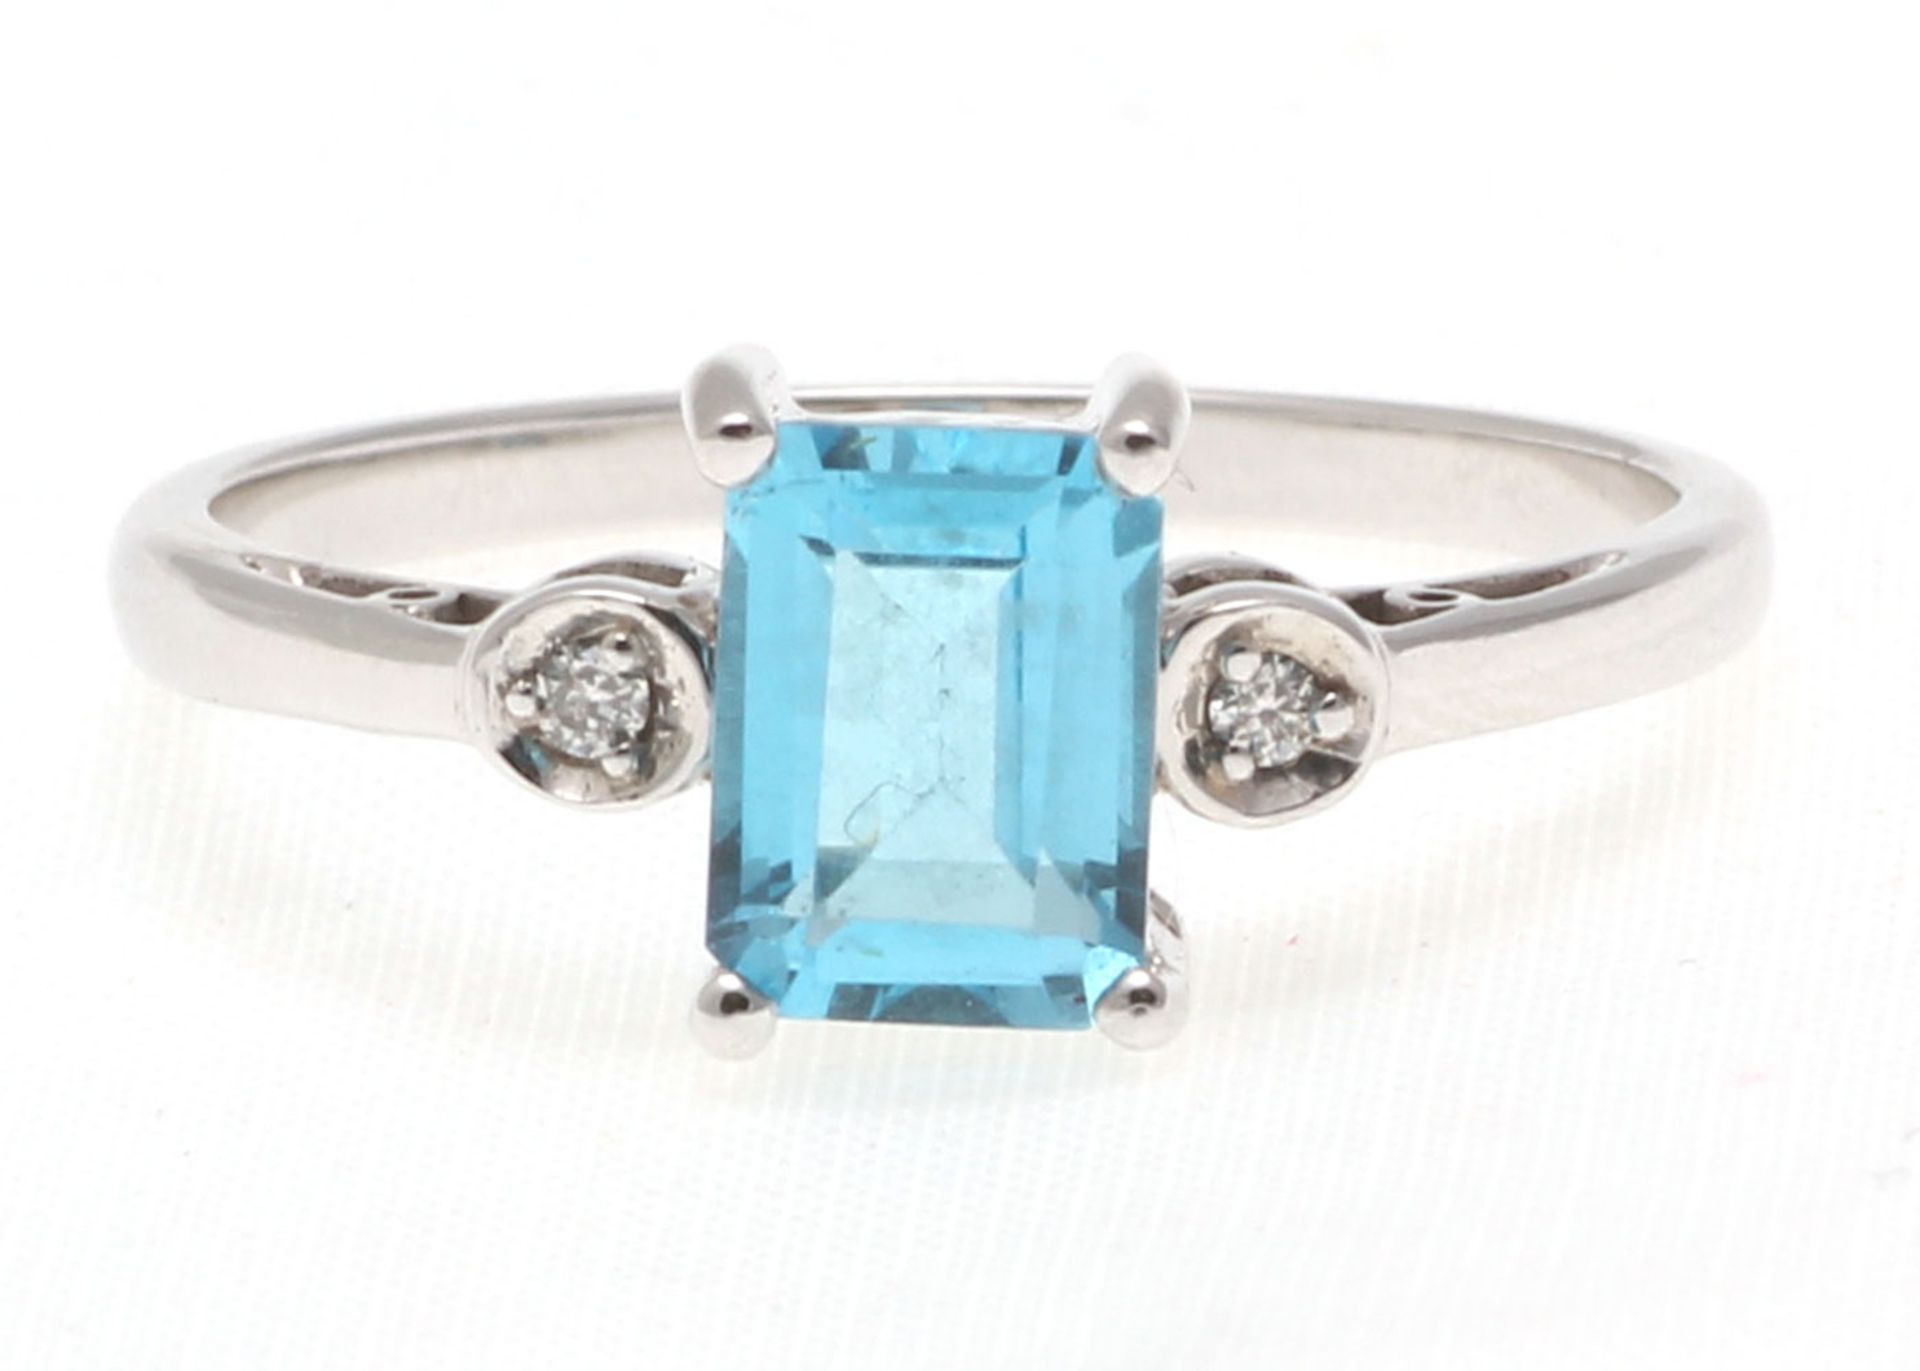 9ct White Gold Blue Topaz Diamond Ring 0.02 Carats - Valued by GIE £1,220.00 - An emerald cut Blue